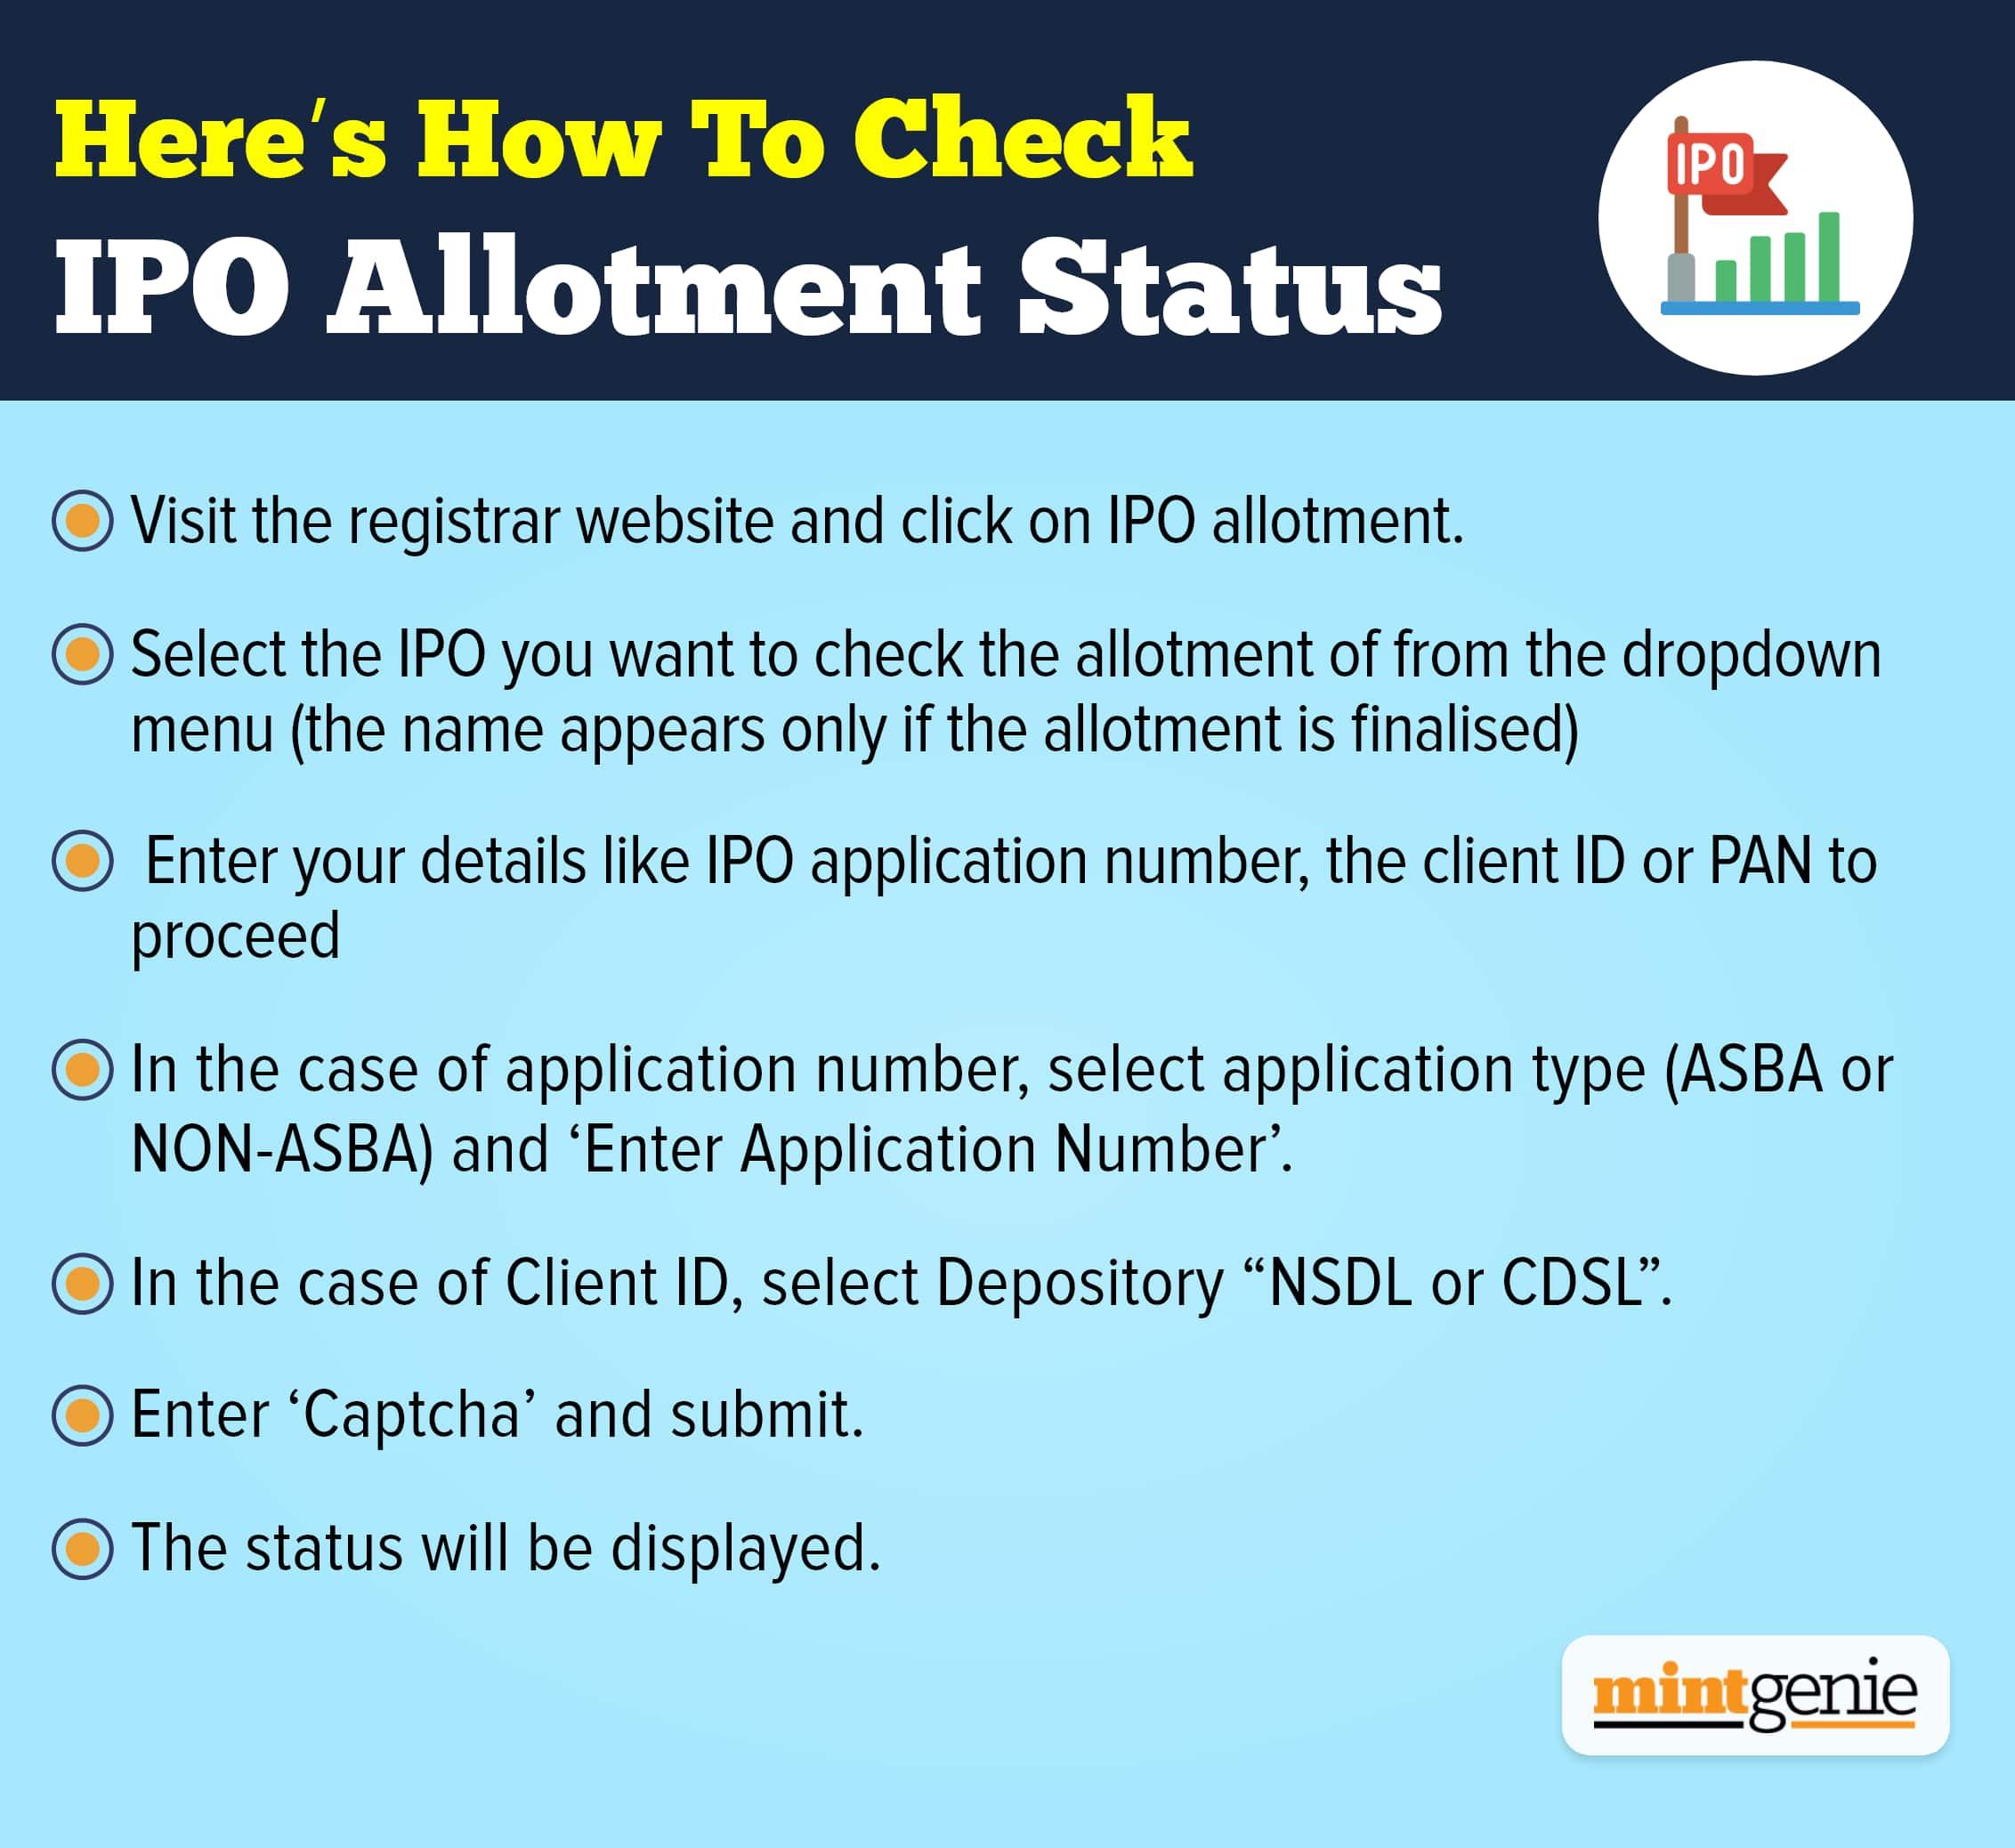 We explain here how to check IPO allotment status